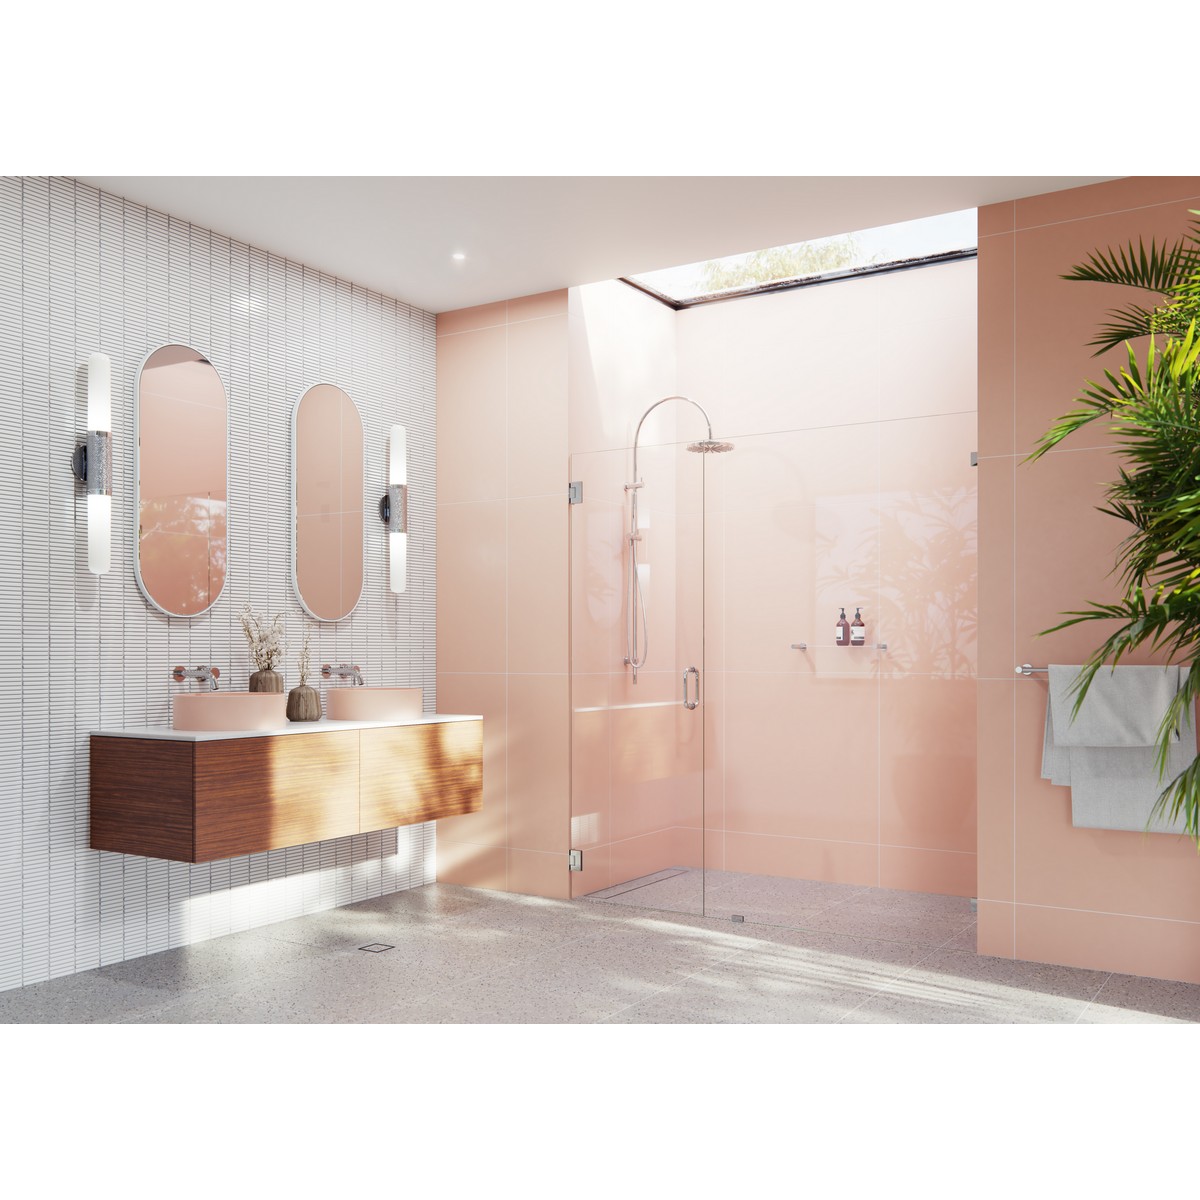 GLASS WAREHOUSE GW-WH-71.25 ILLUME 71 1/4 W X 78 H WALL HINGED FULLY FRAMELESS GLASS SHOWER ENCLOSURE